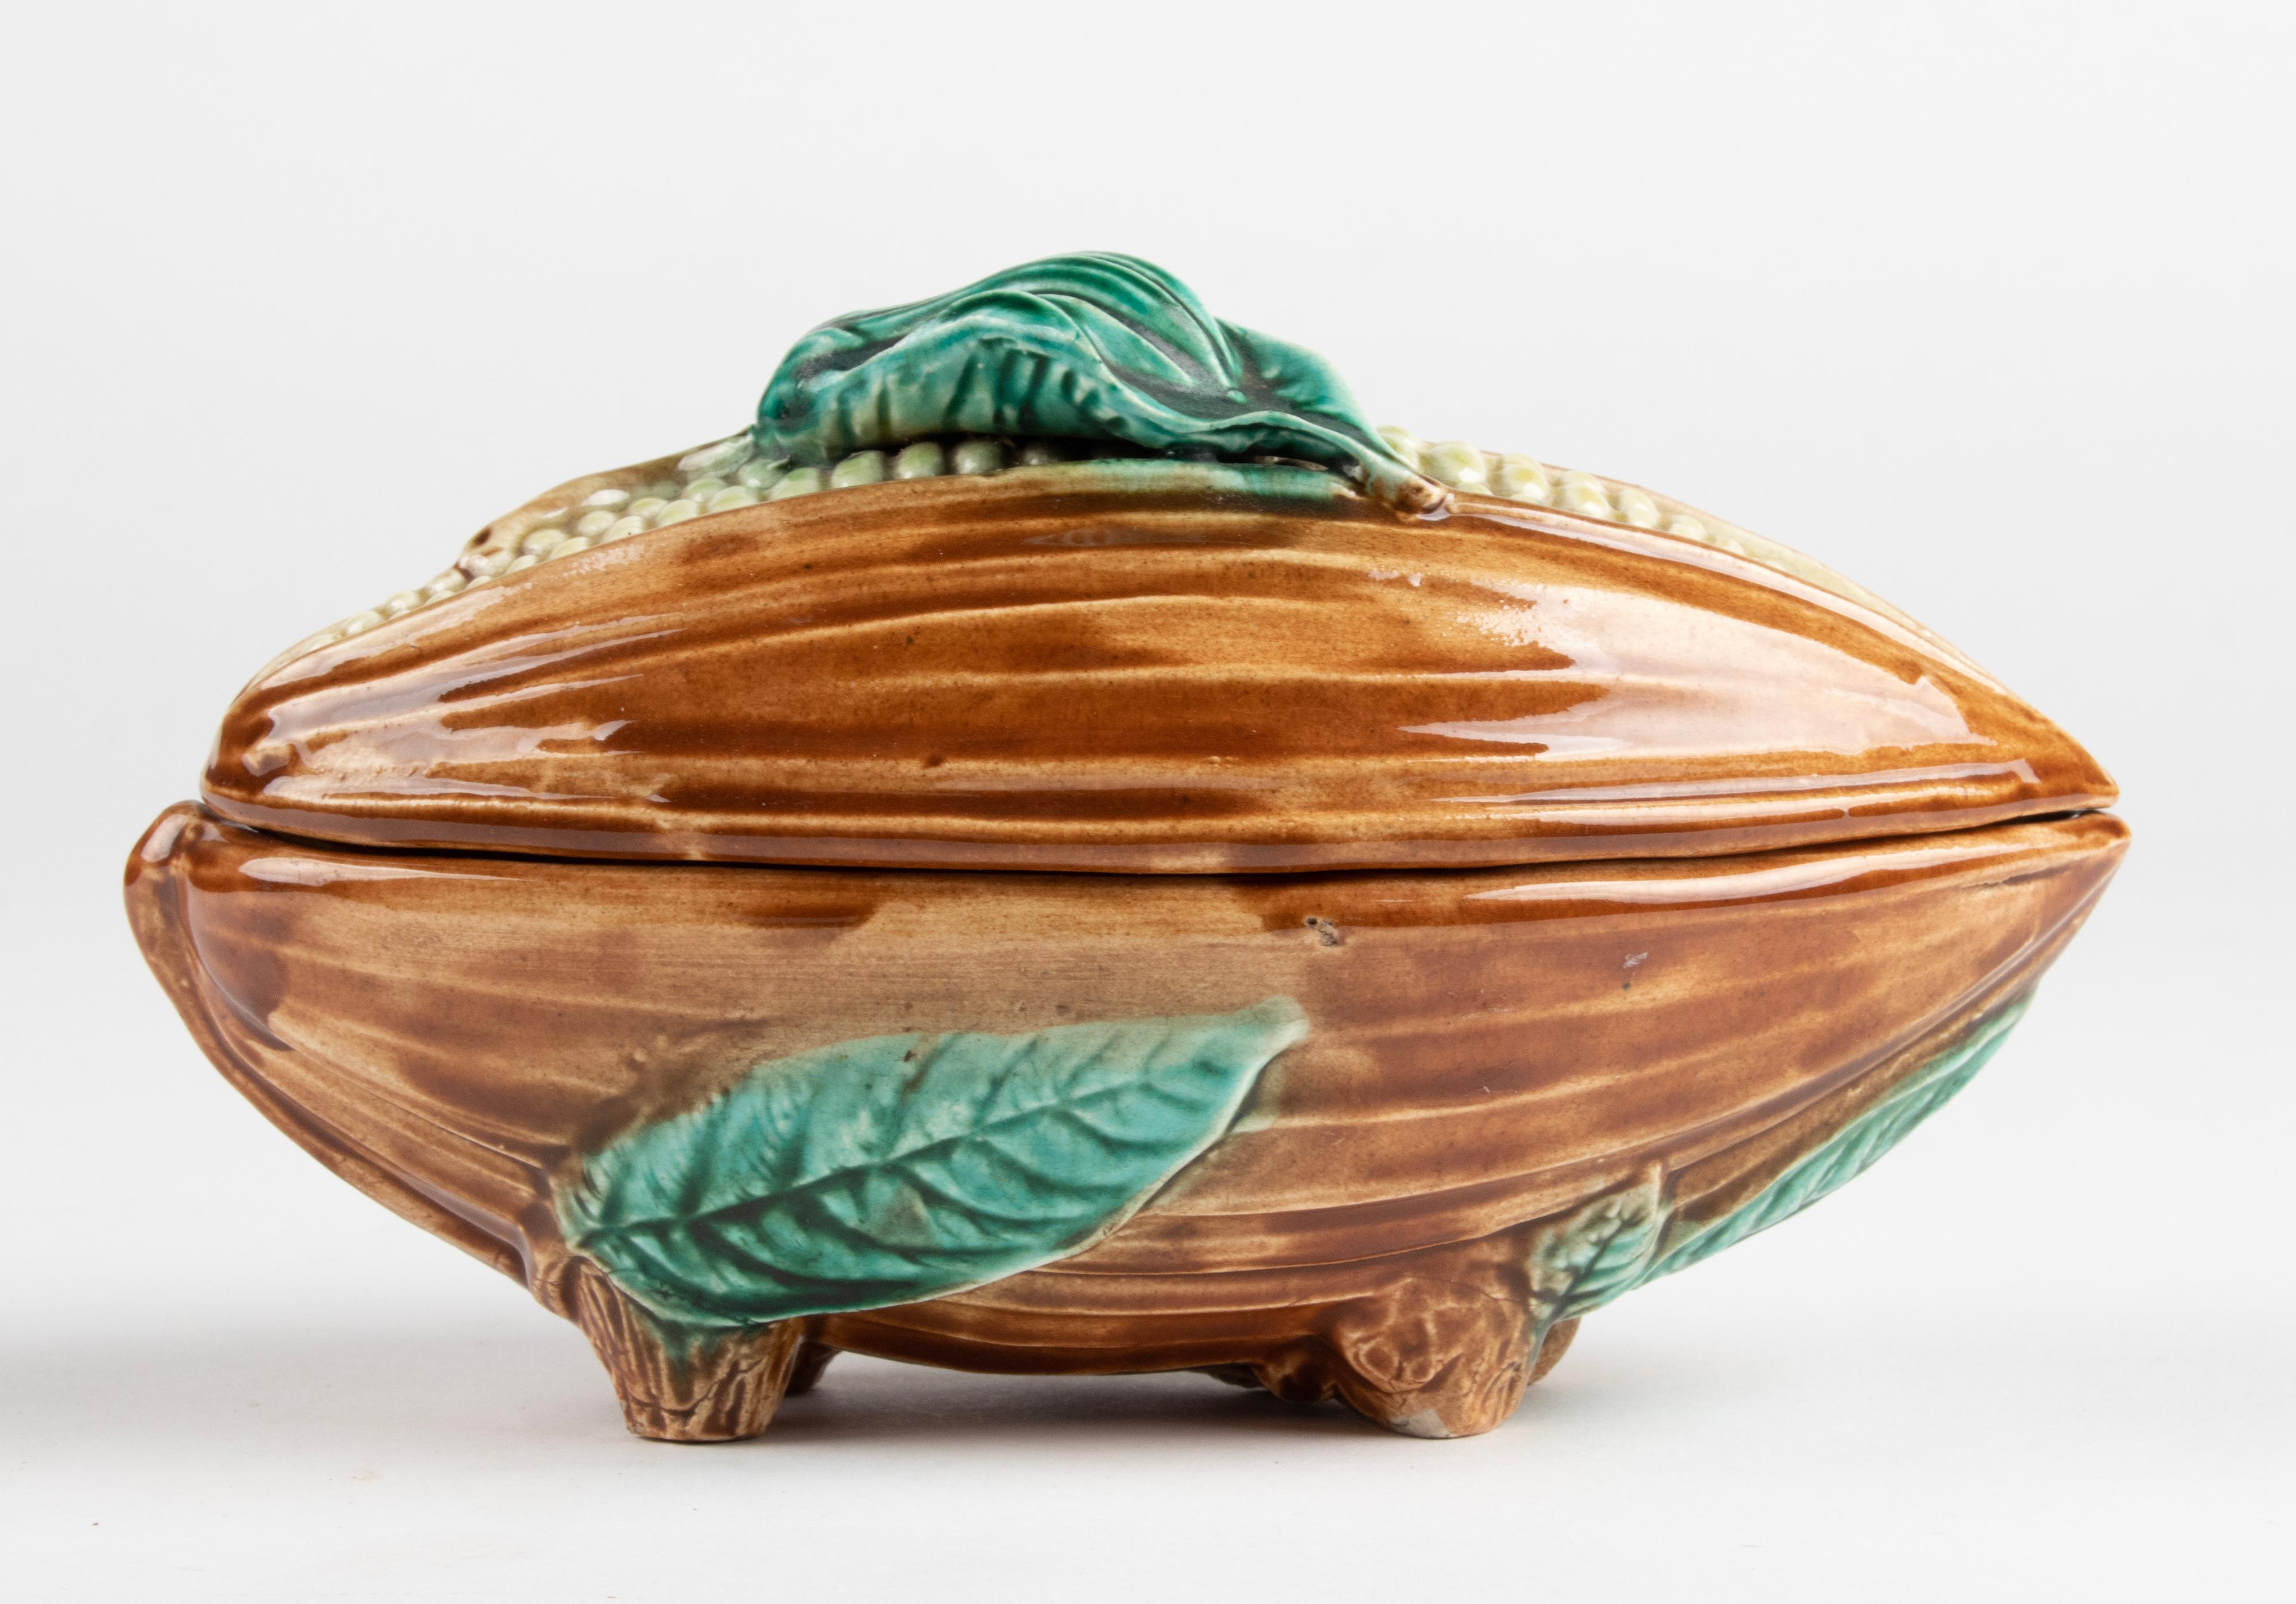 Lovely majolica dish with lid, shaped like a corn cob.
Beautifully patinated with vibrant colours. The bowl is not marked, maker unknown. Presumably of French origin, dating from around 1890-1900. In very good condition.